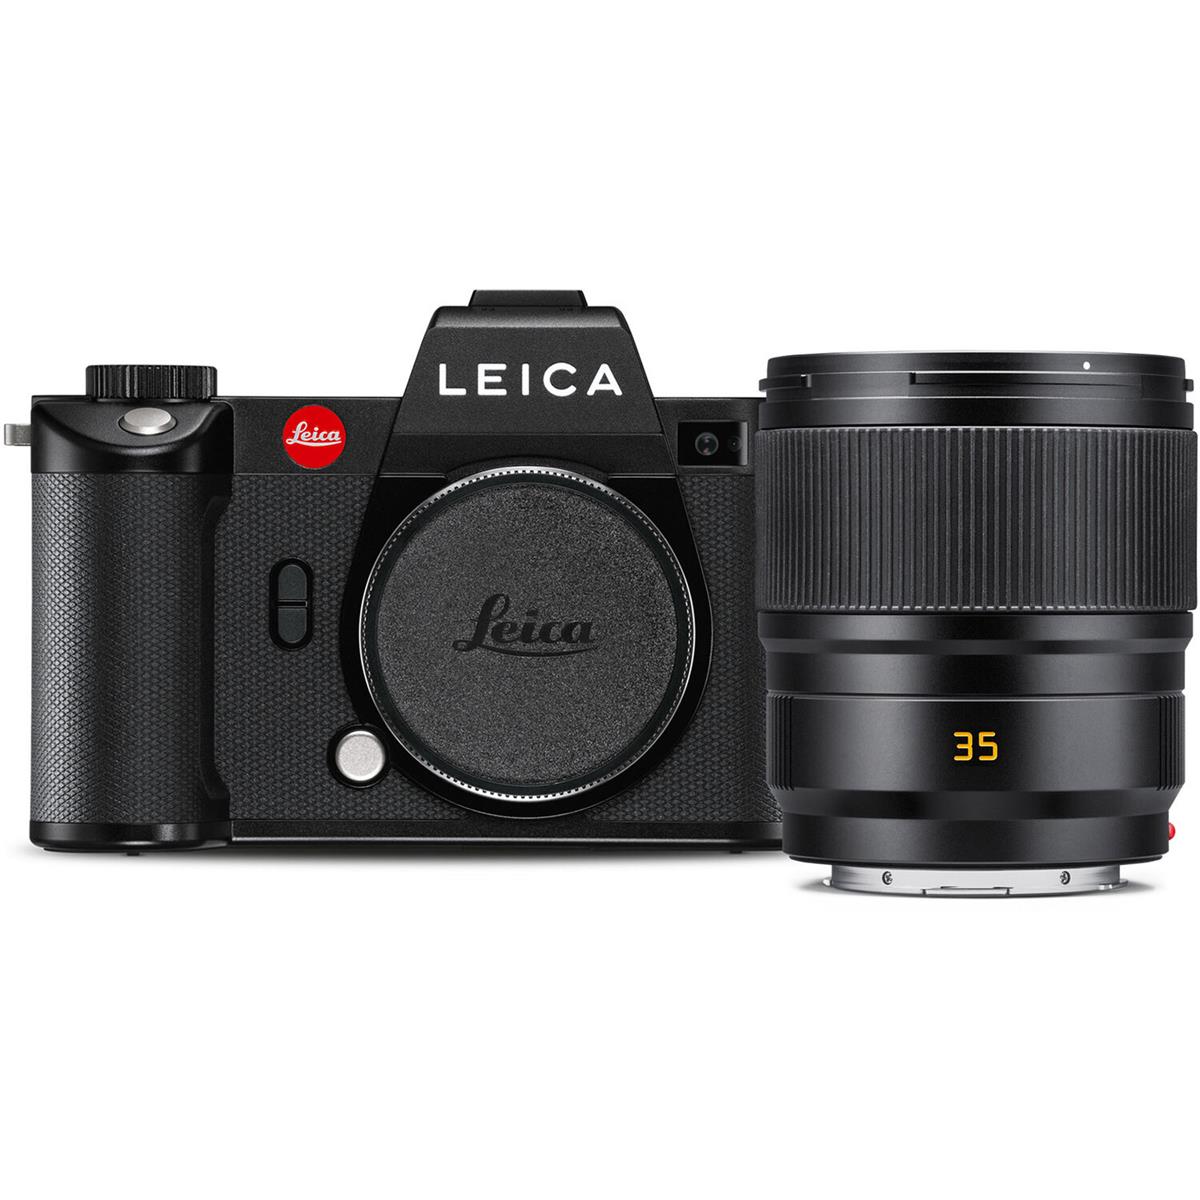 Image of Leica SL2 Mirrorless Camera with Summicron-SL 35mm f/2 ASPH Lens